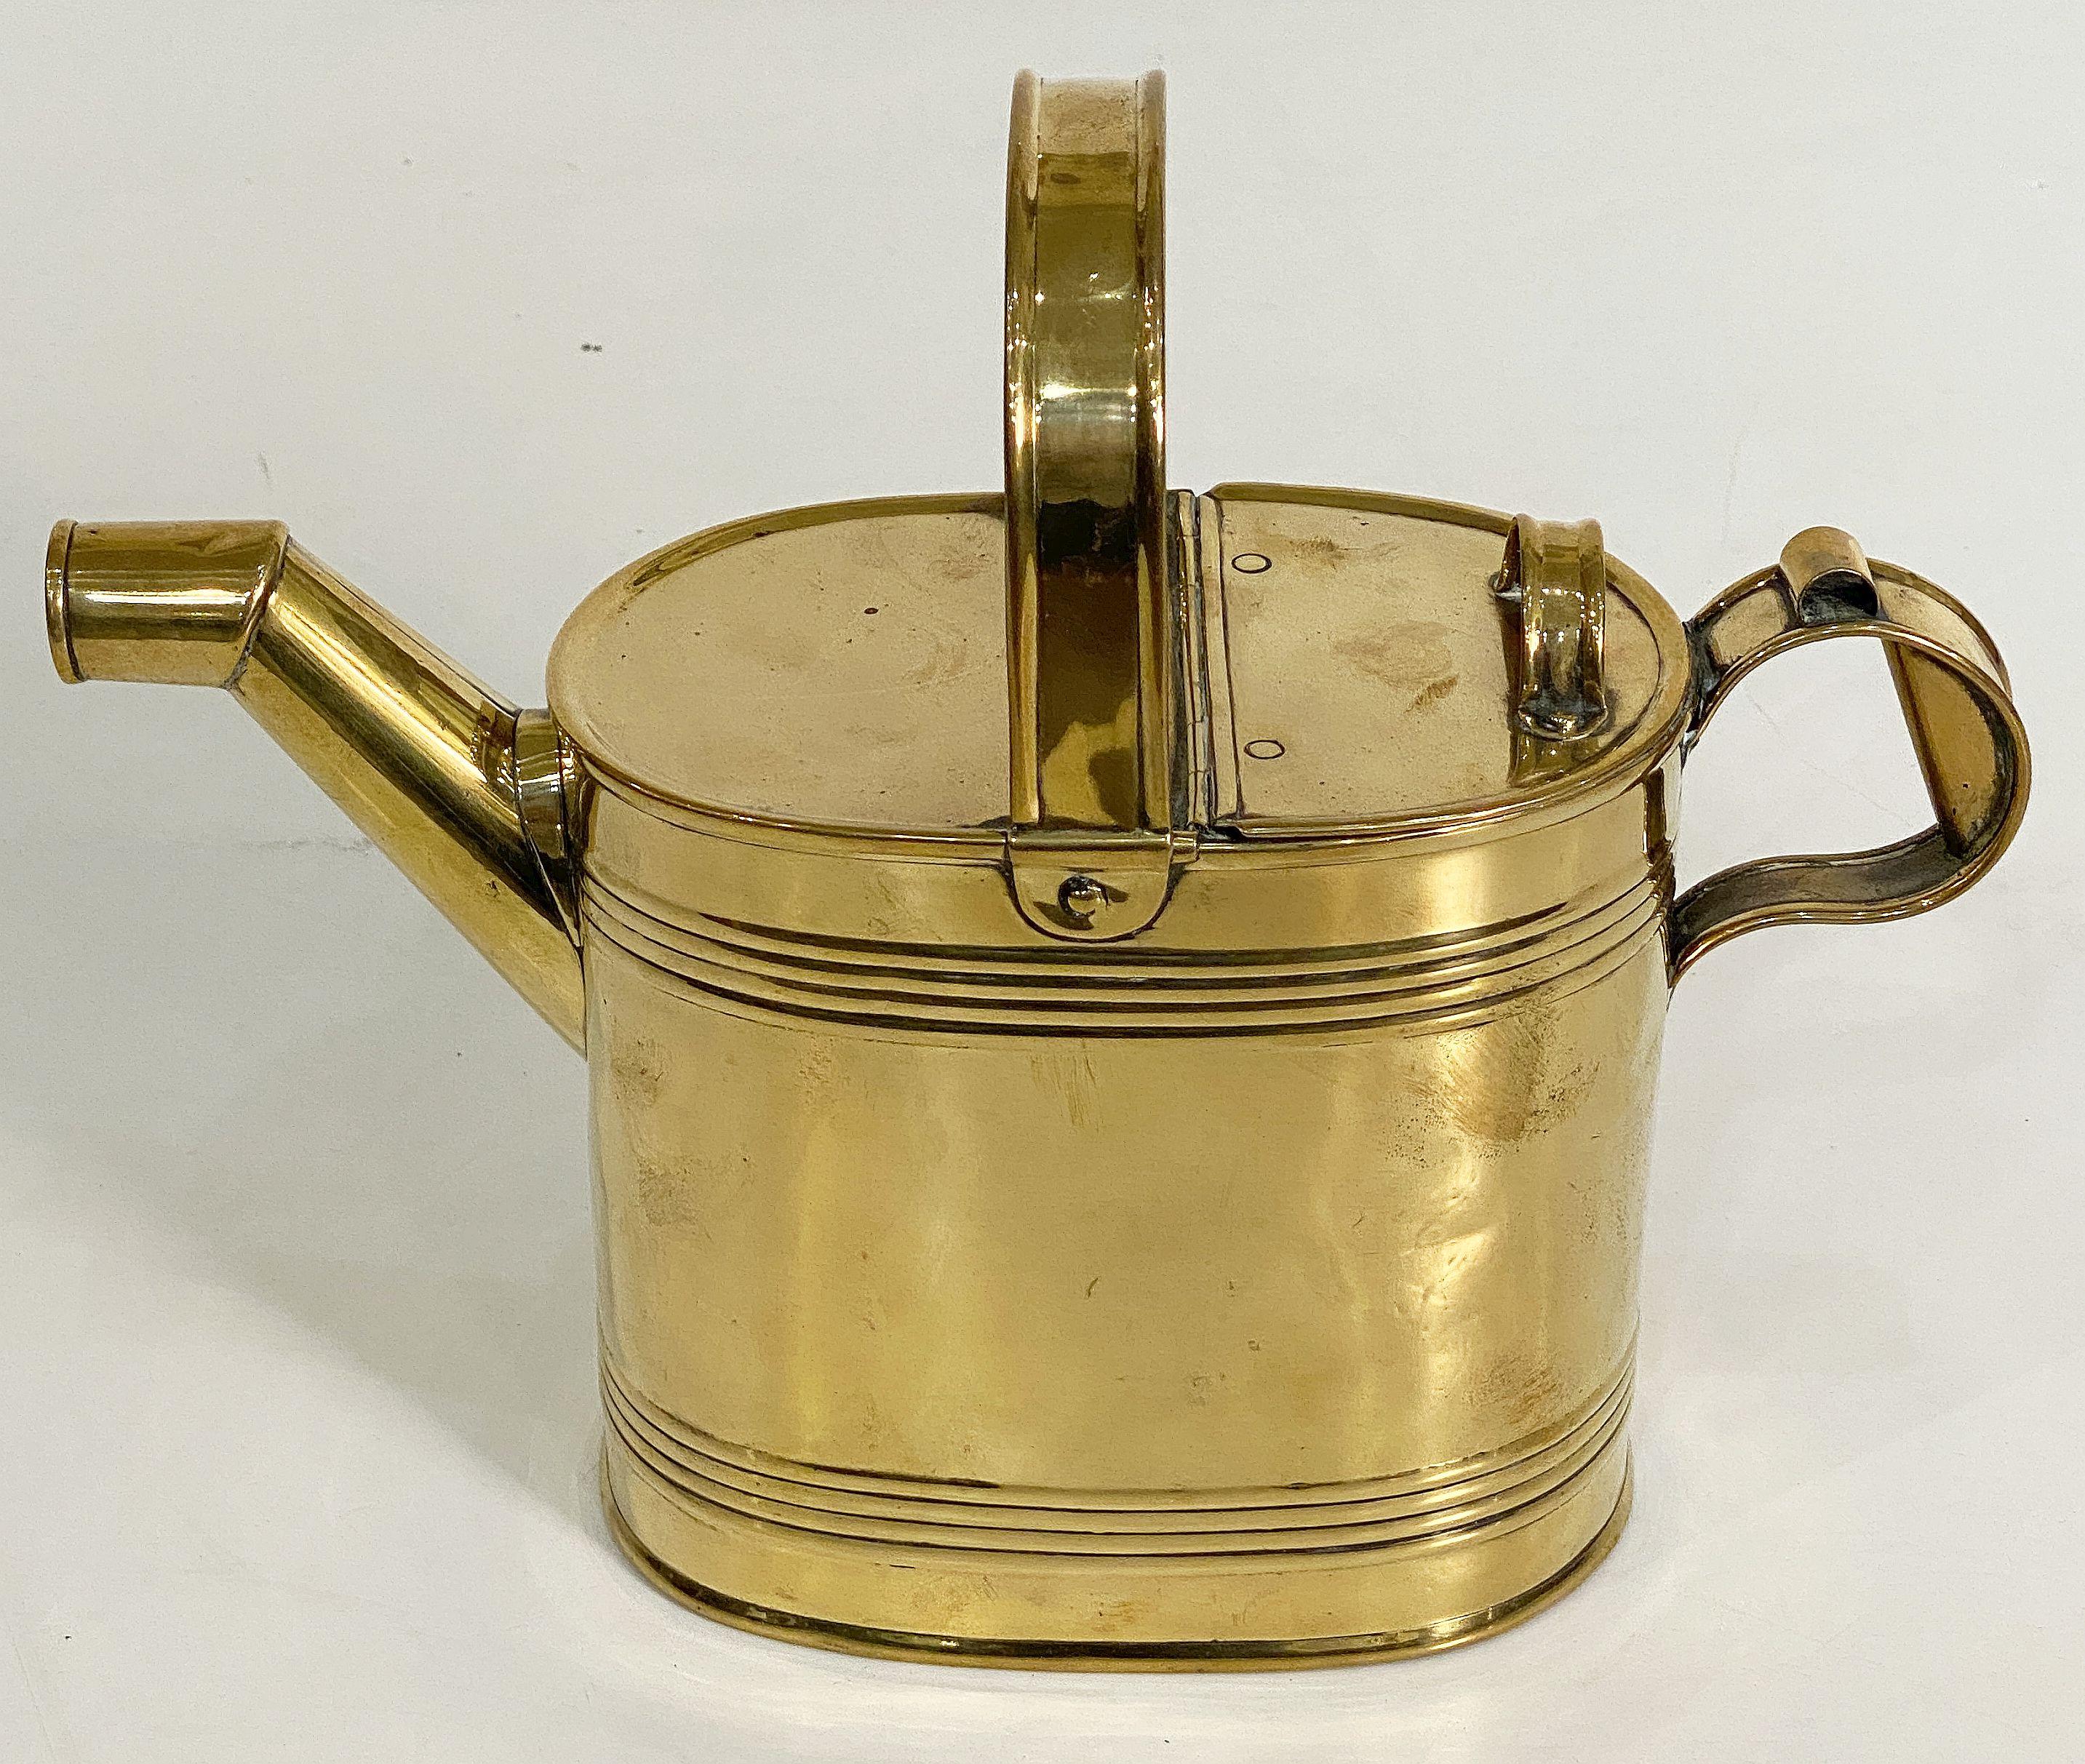 A fine English oval watering can of brass for the garden with a brass handle across the top, hinged back section, and a smaller handle at the end opposite the spout. With registration mark to base.